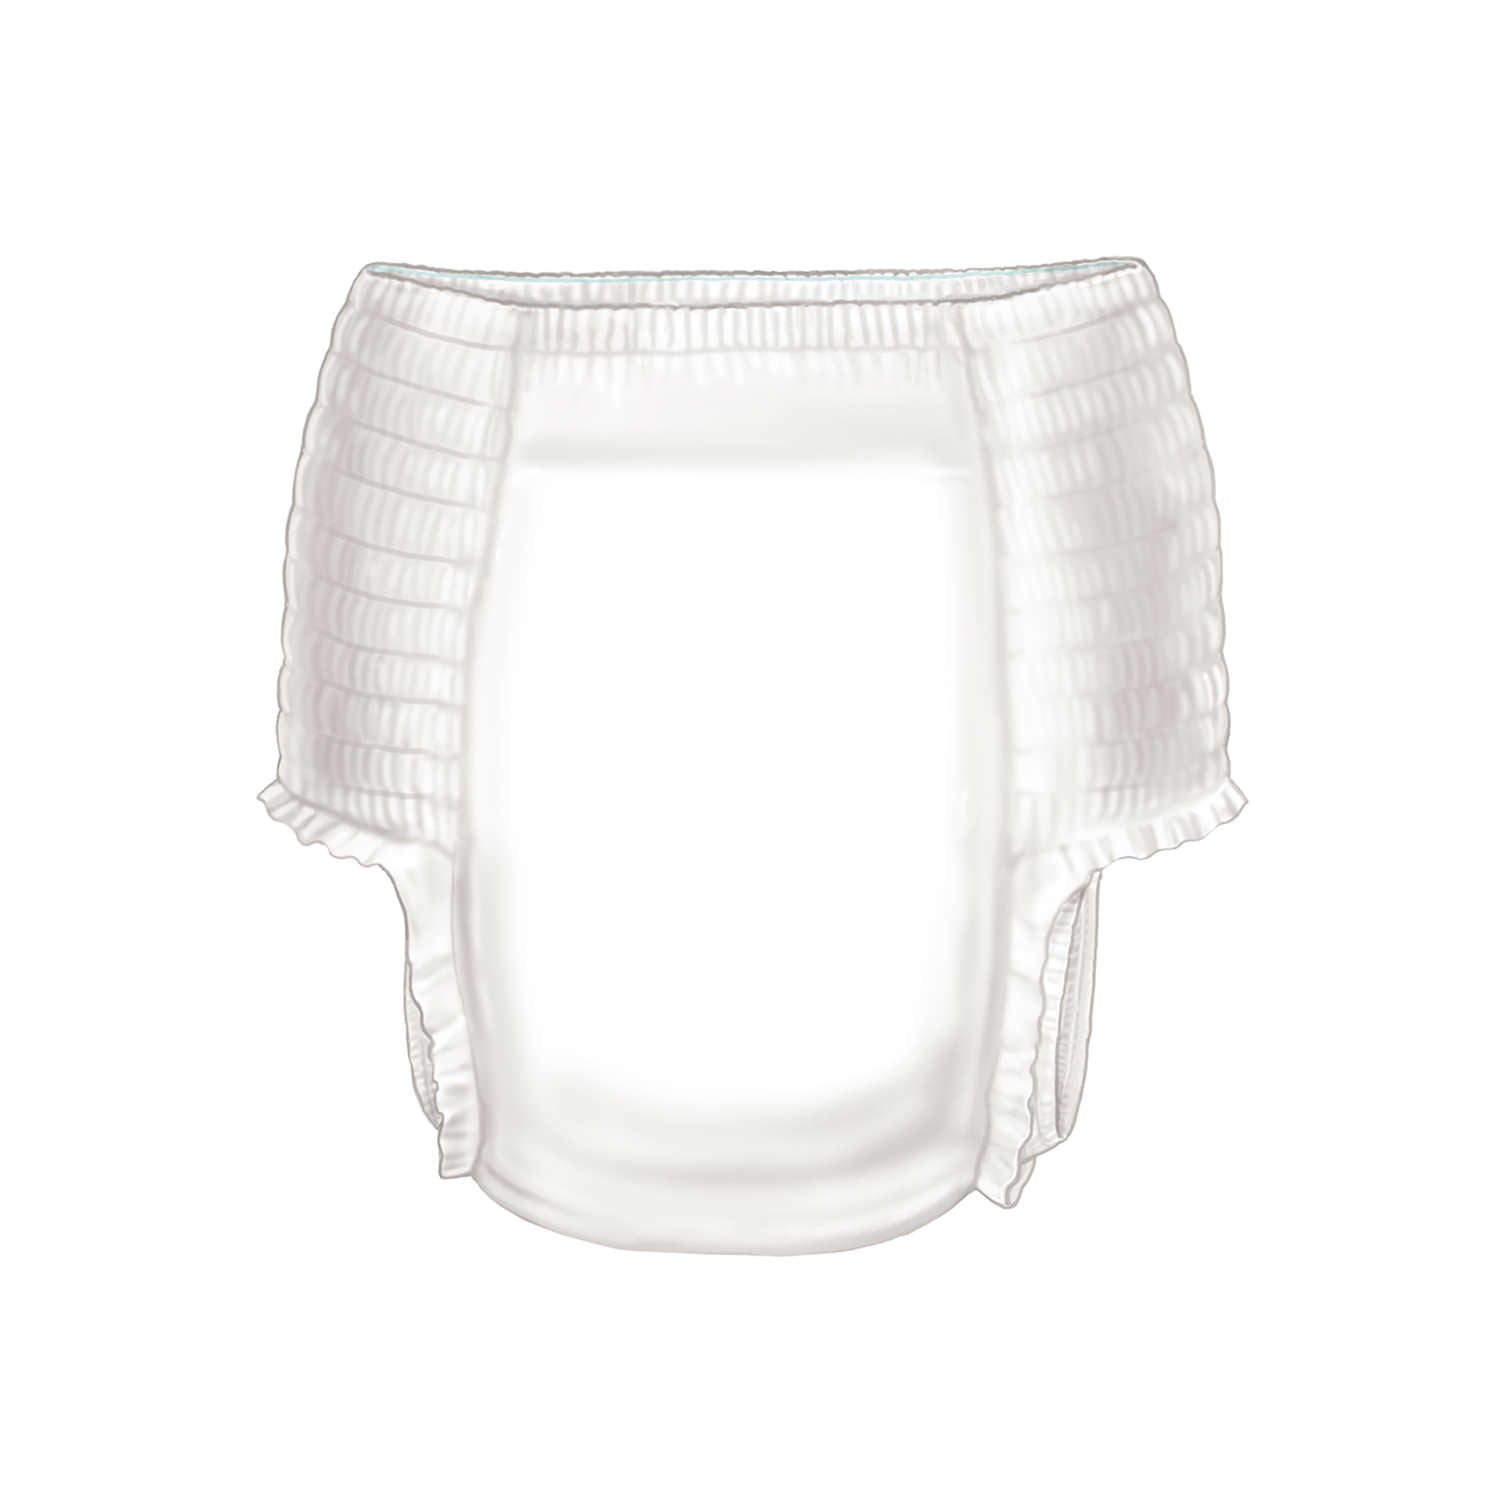 Disposable Incontinence Underwear for Men, Women Teens & Kids from